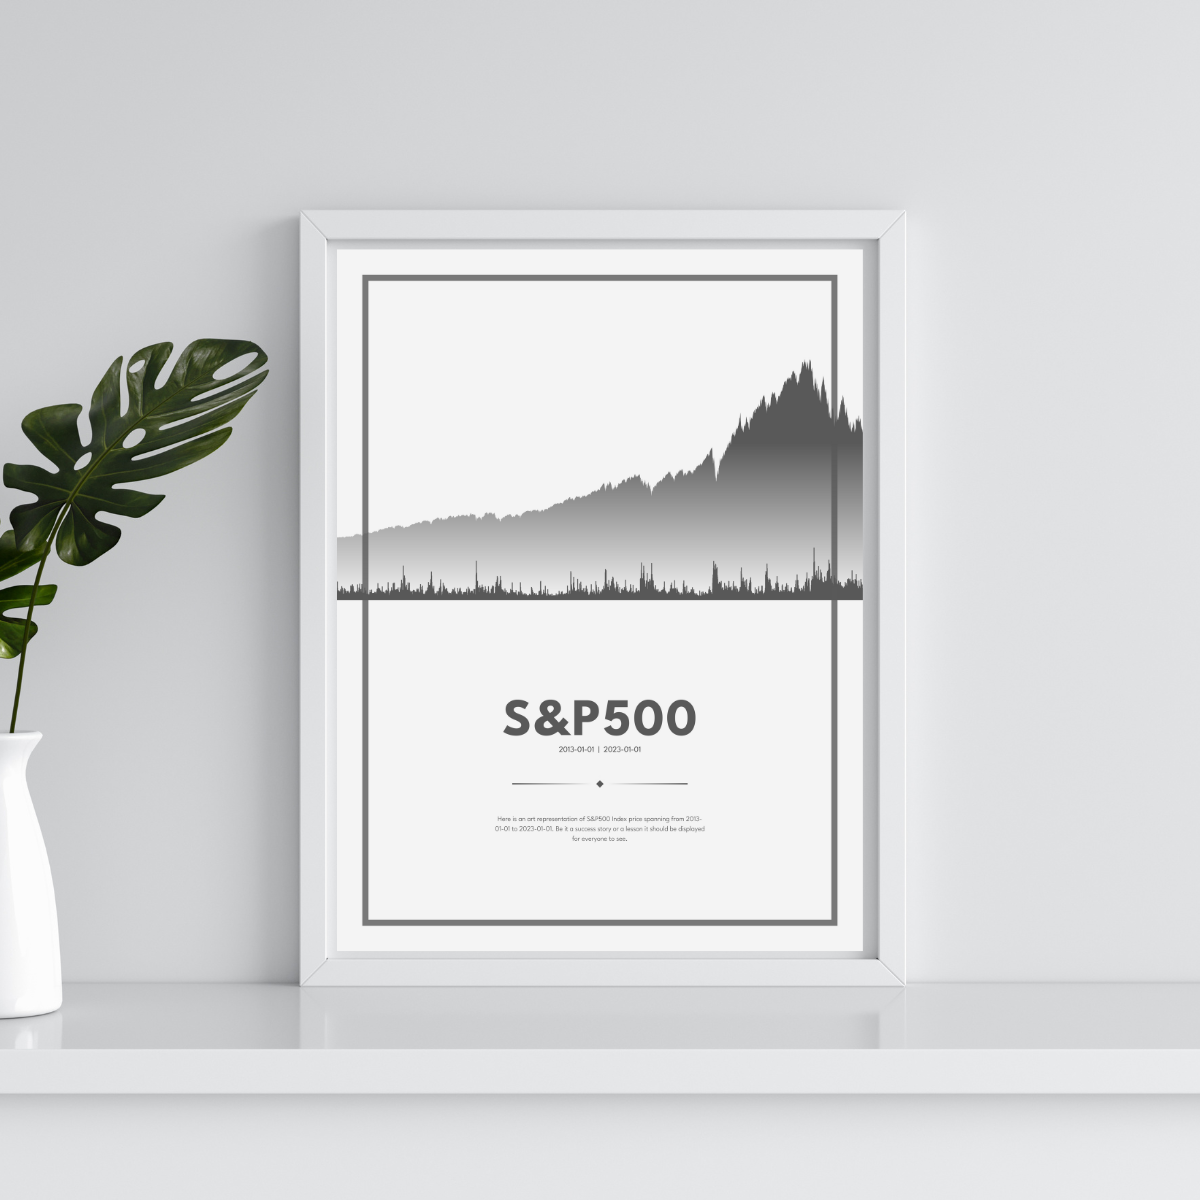 S&P500 trading poster hanging on wall